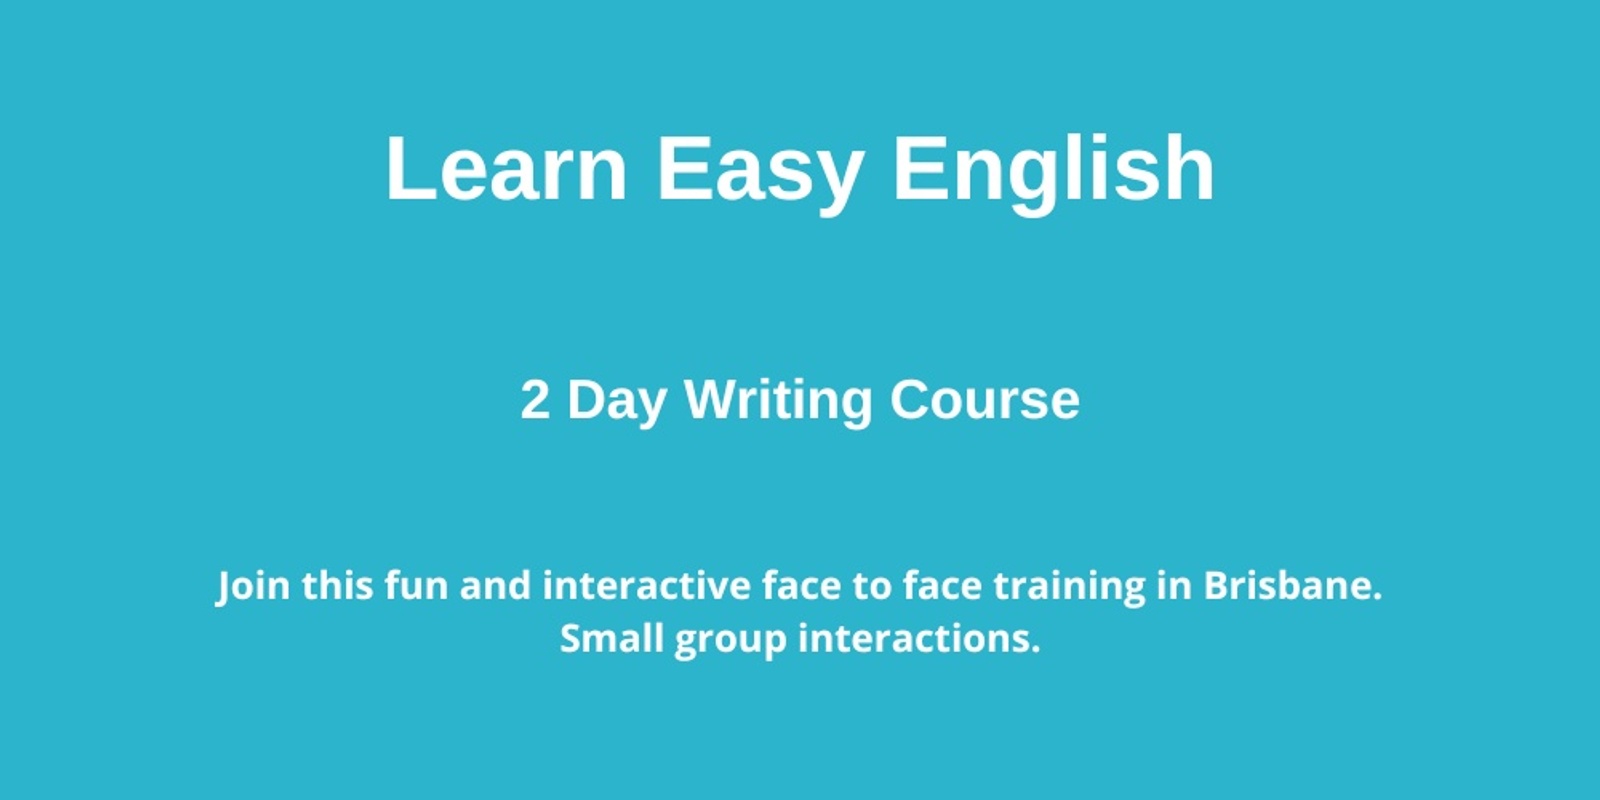 Tuesday June 27 & Wednesday  June 28, 2023 Face to Face Brisbane - Learn Easy English. 2 day writing course